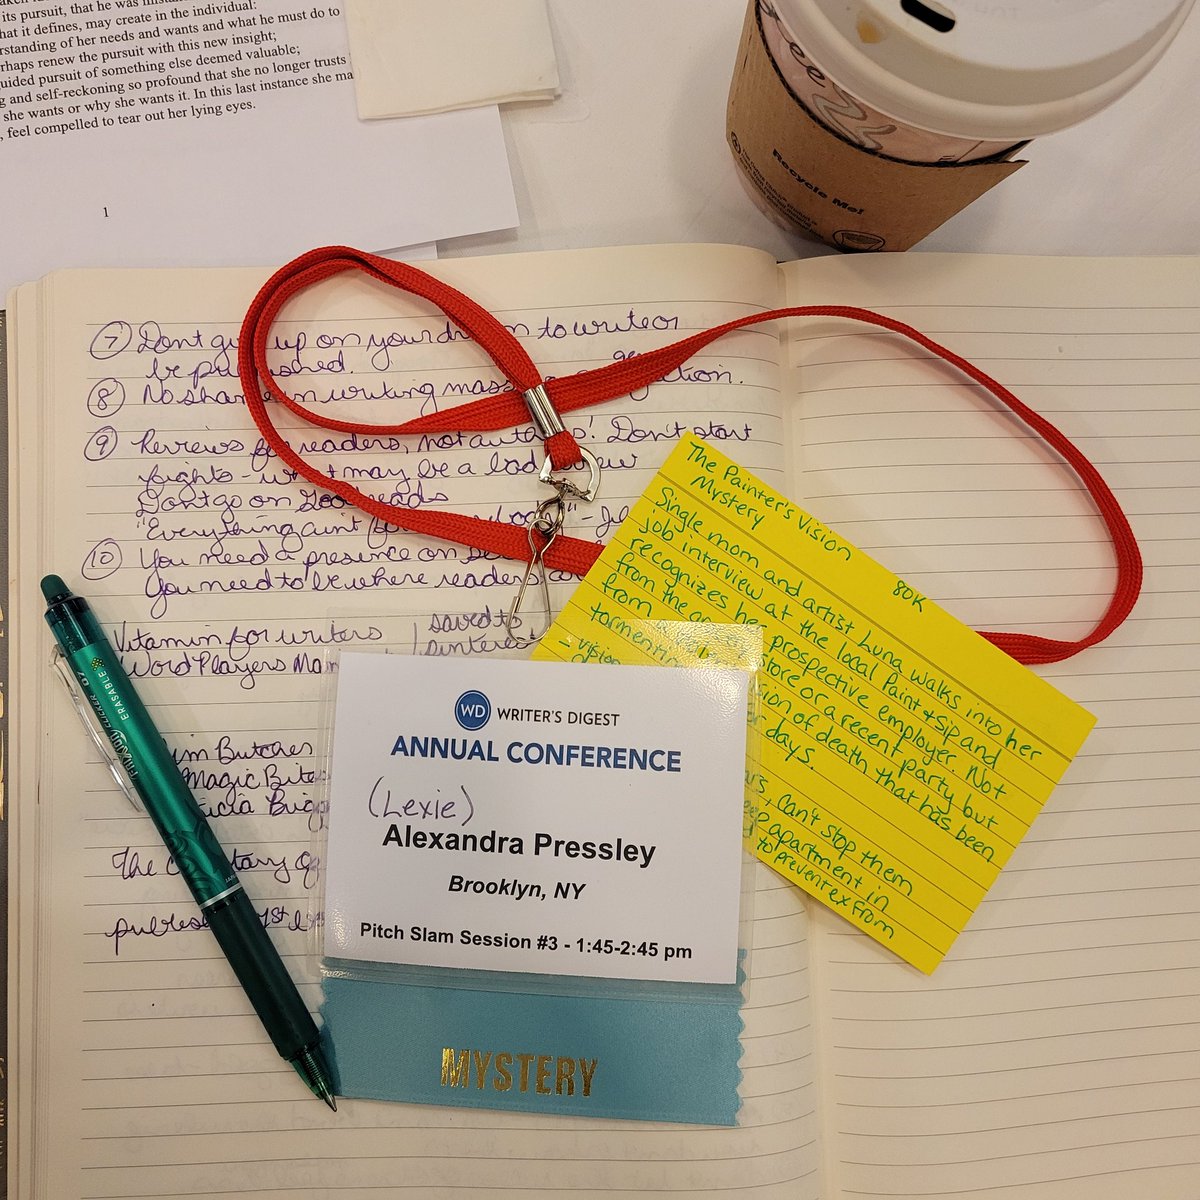 #WDC22
Good luck to all the writers pitching today at the Writer's Digest Conference!  So excited to share my work!